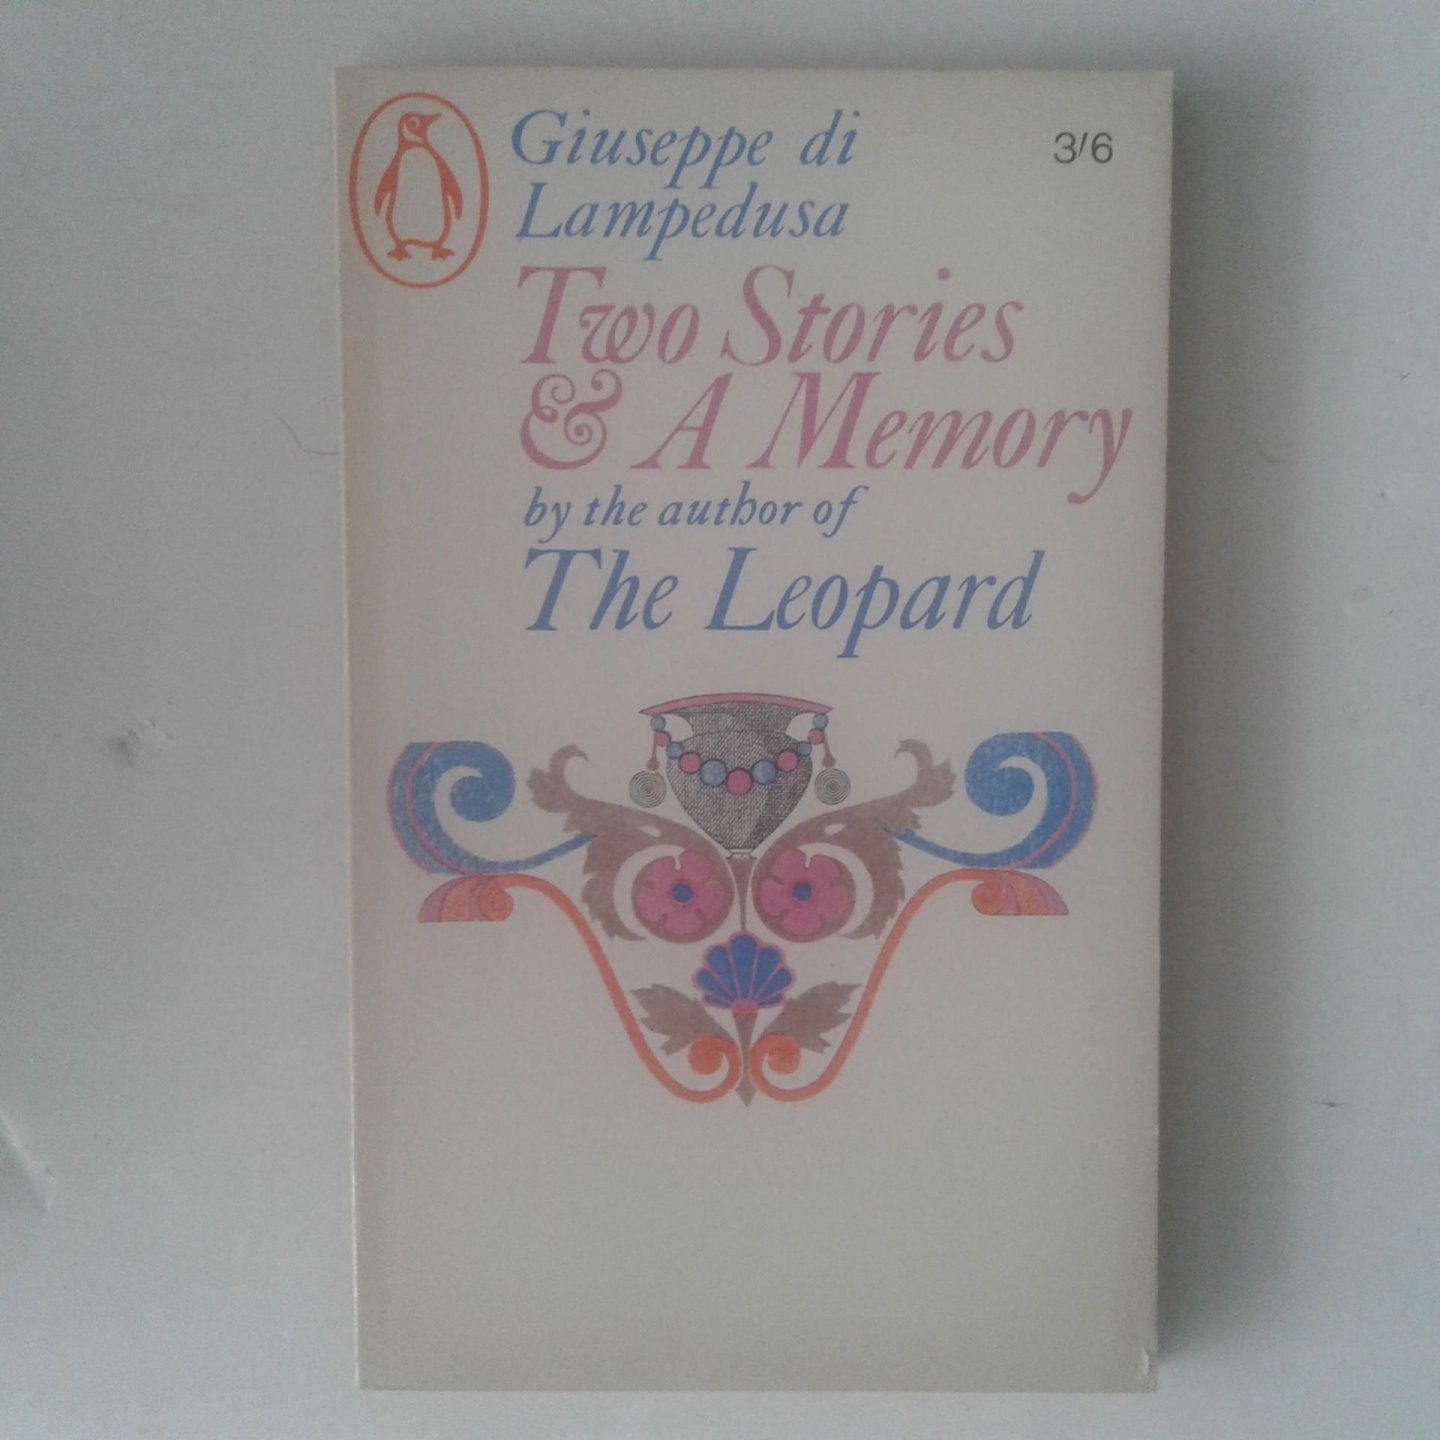 Lampedusa, Giuseppe di - Two Stories and A Memory